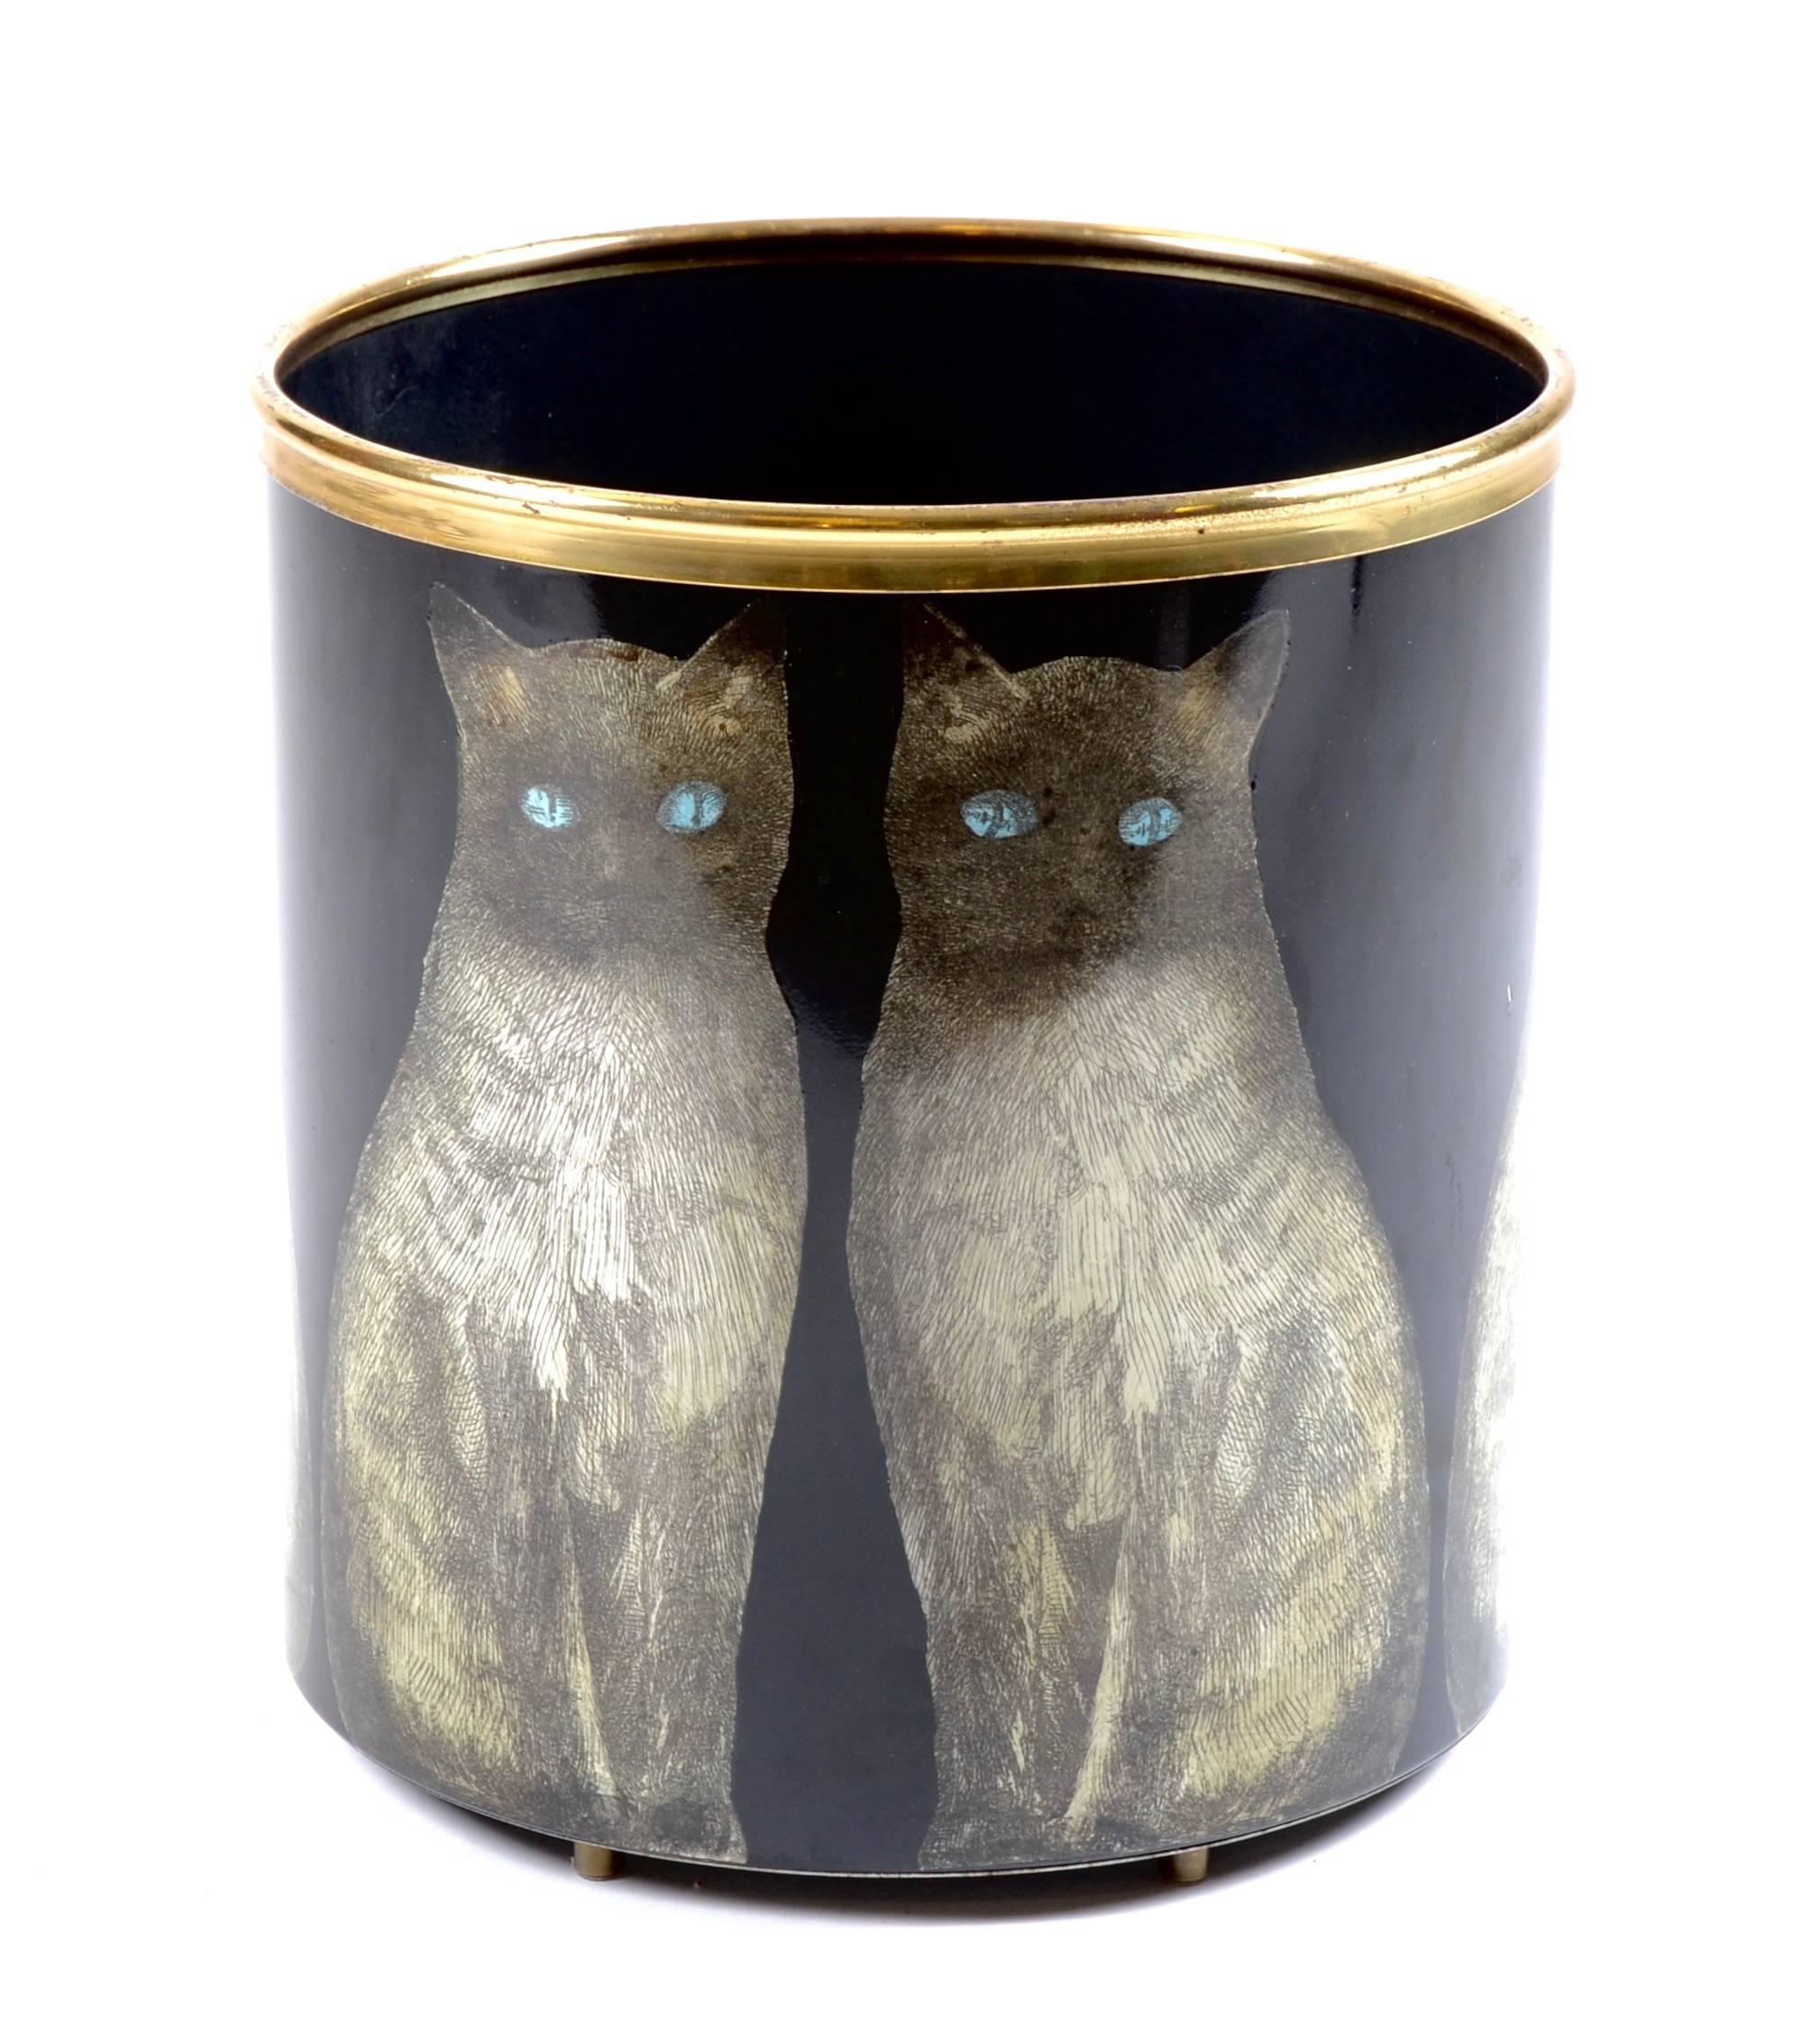 Waste paper bin with motif of cats, designed by Piero Fornasetti, late 20th century.